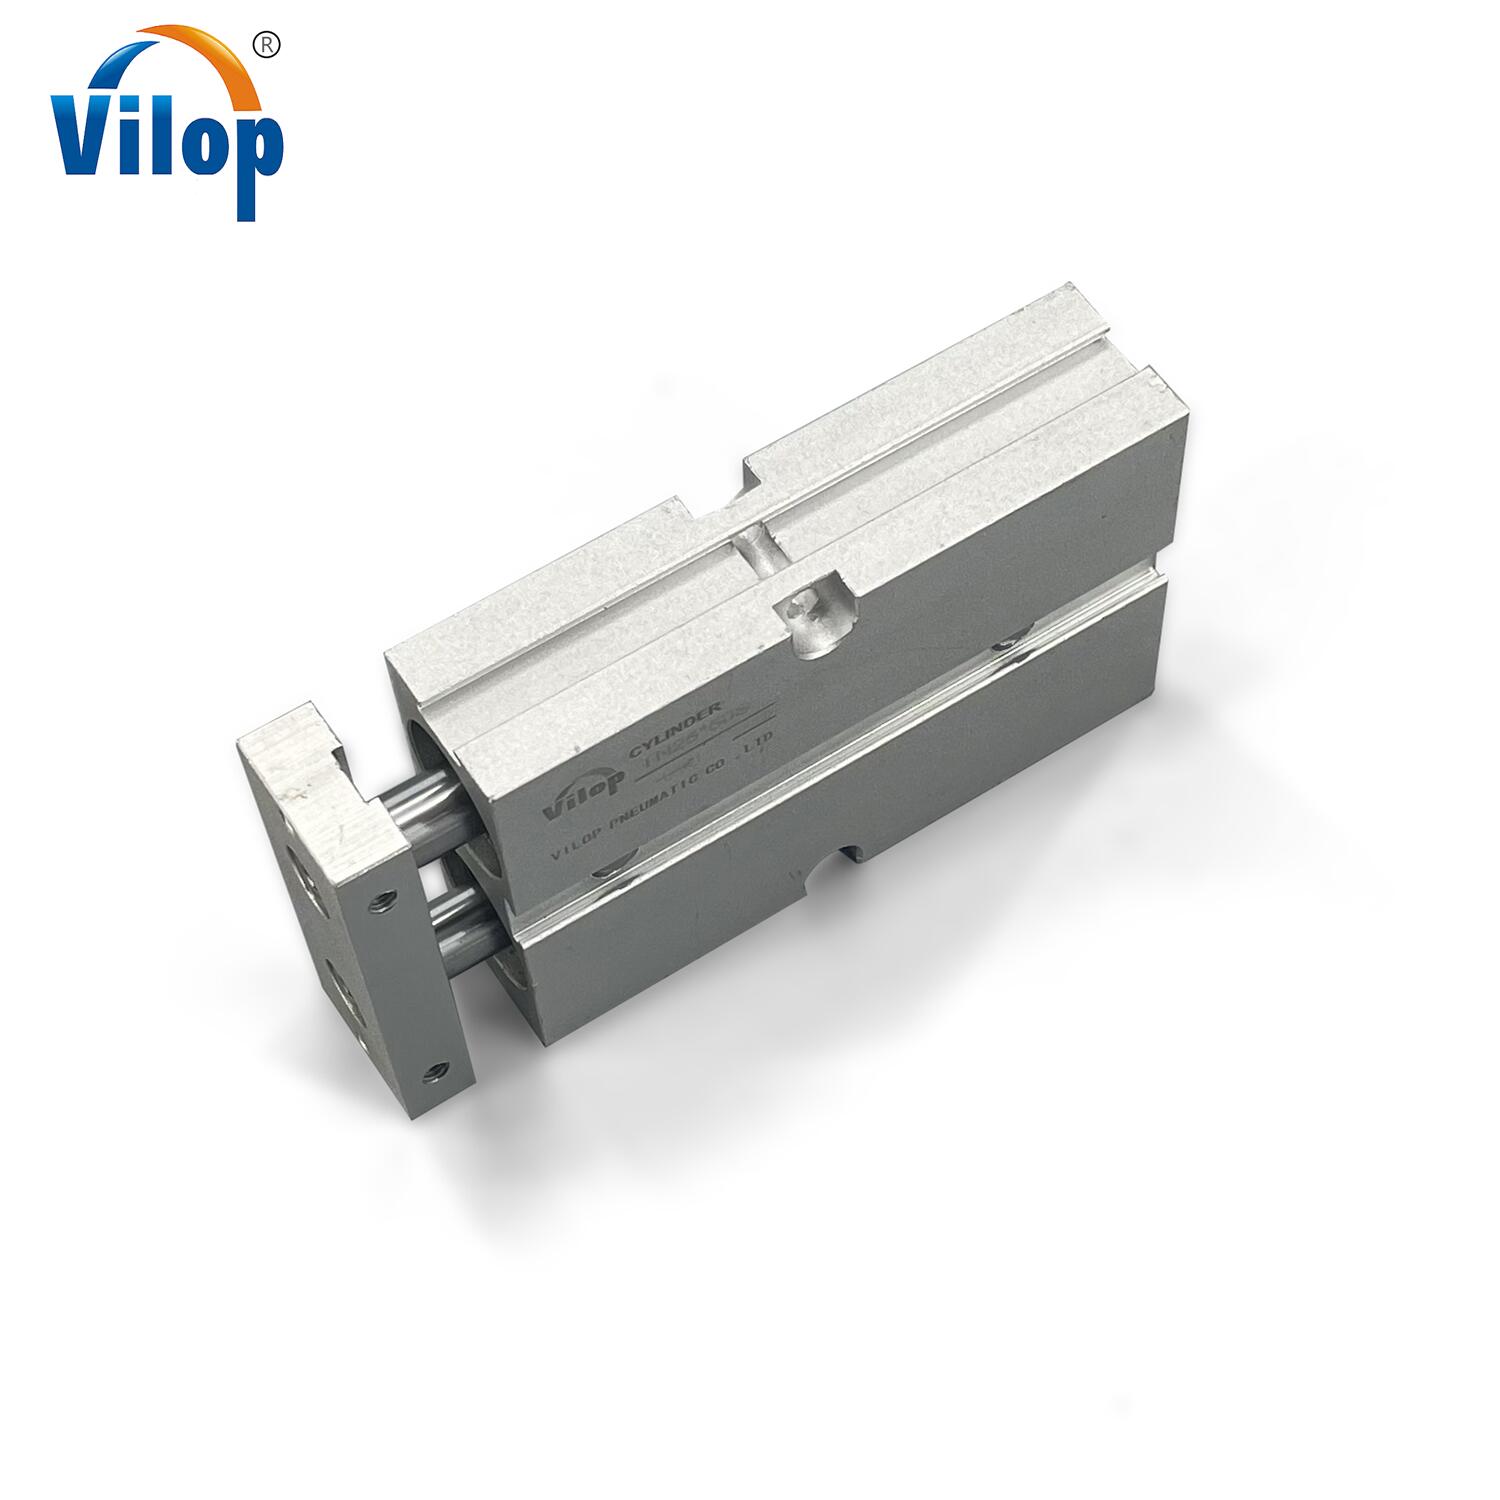 Why Does Vilop Have The Ability To Provide All Aspects Of Customized Cylinder Services?